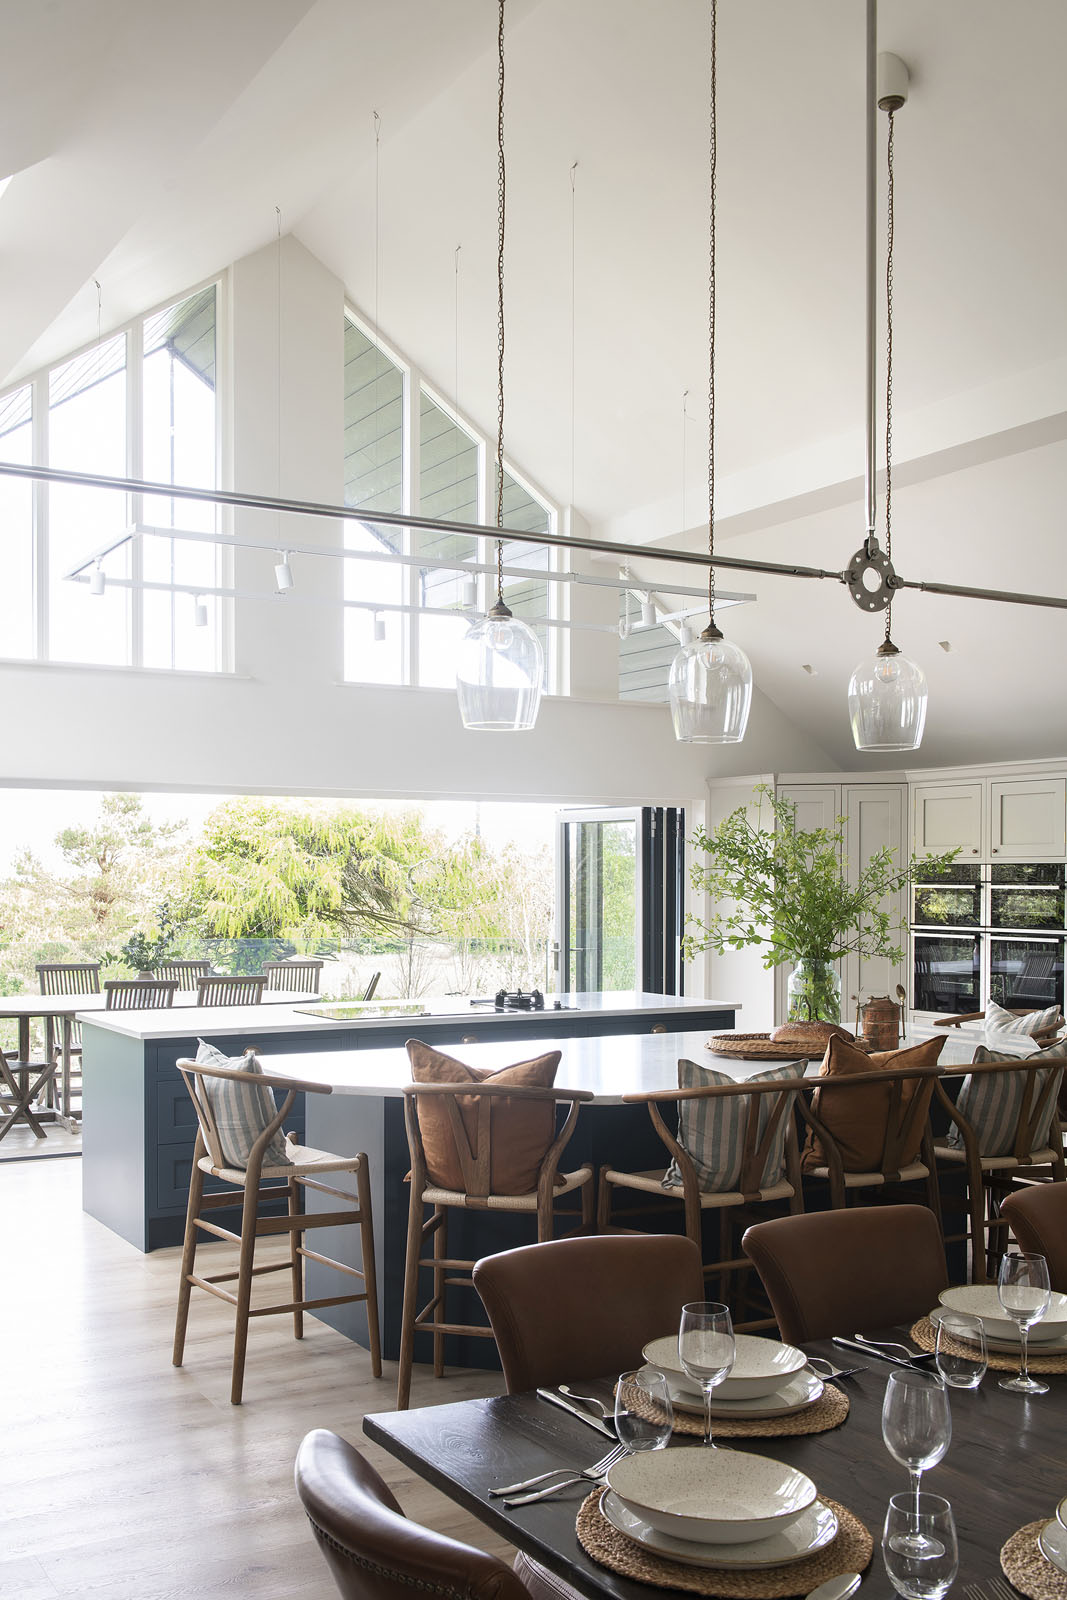 Cornwall Open Kitchen and Dining